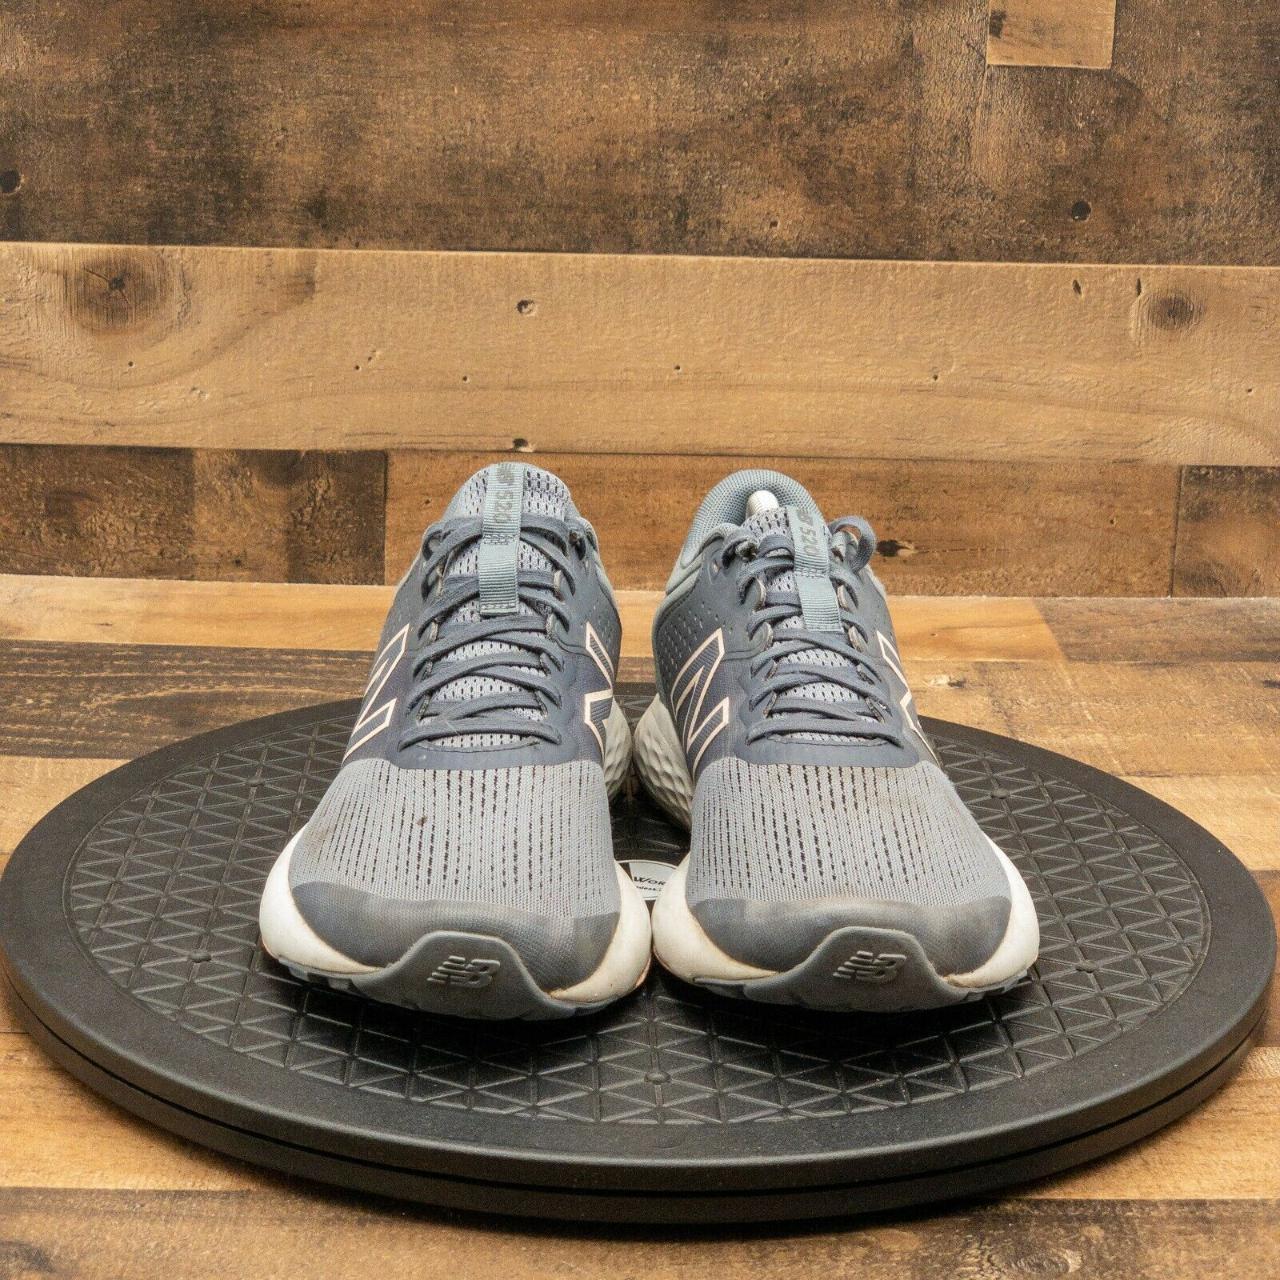 New Balance Women's Blue and Grey Trainers (4)